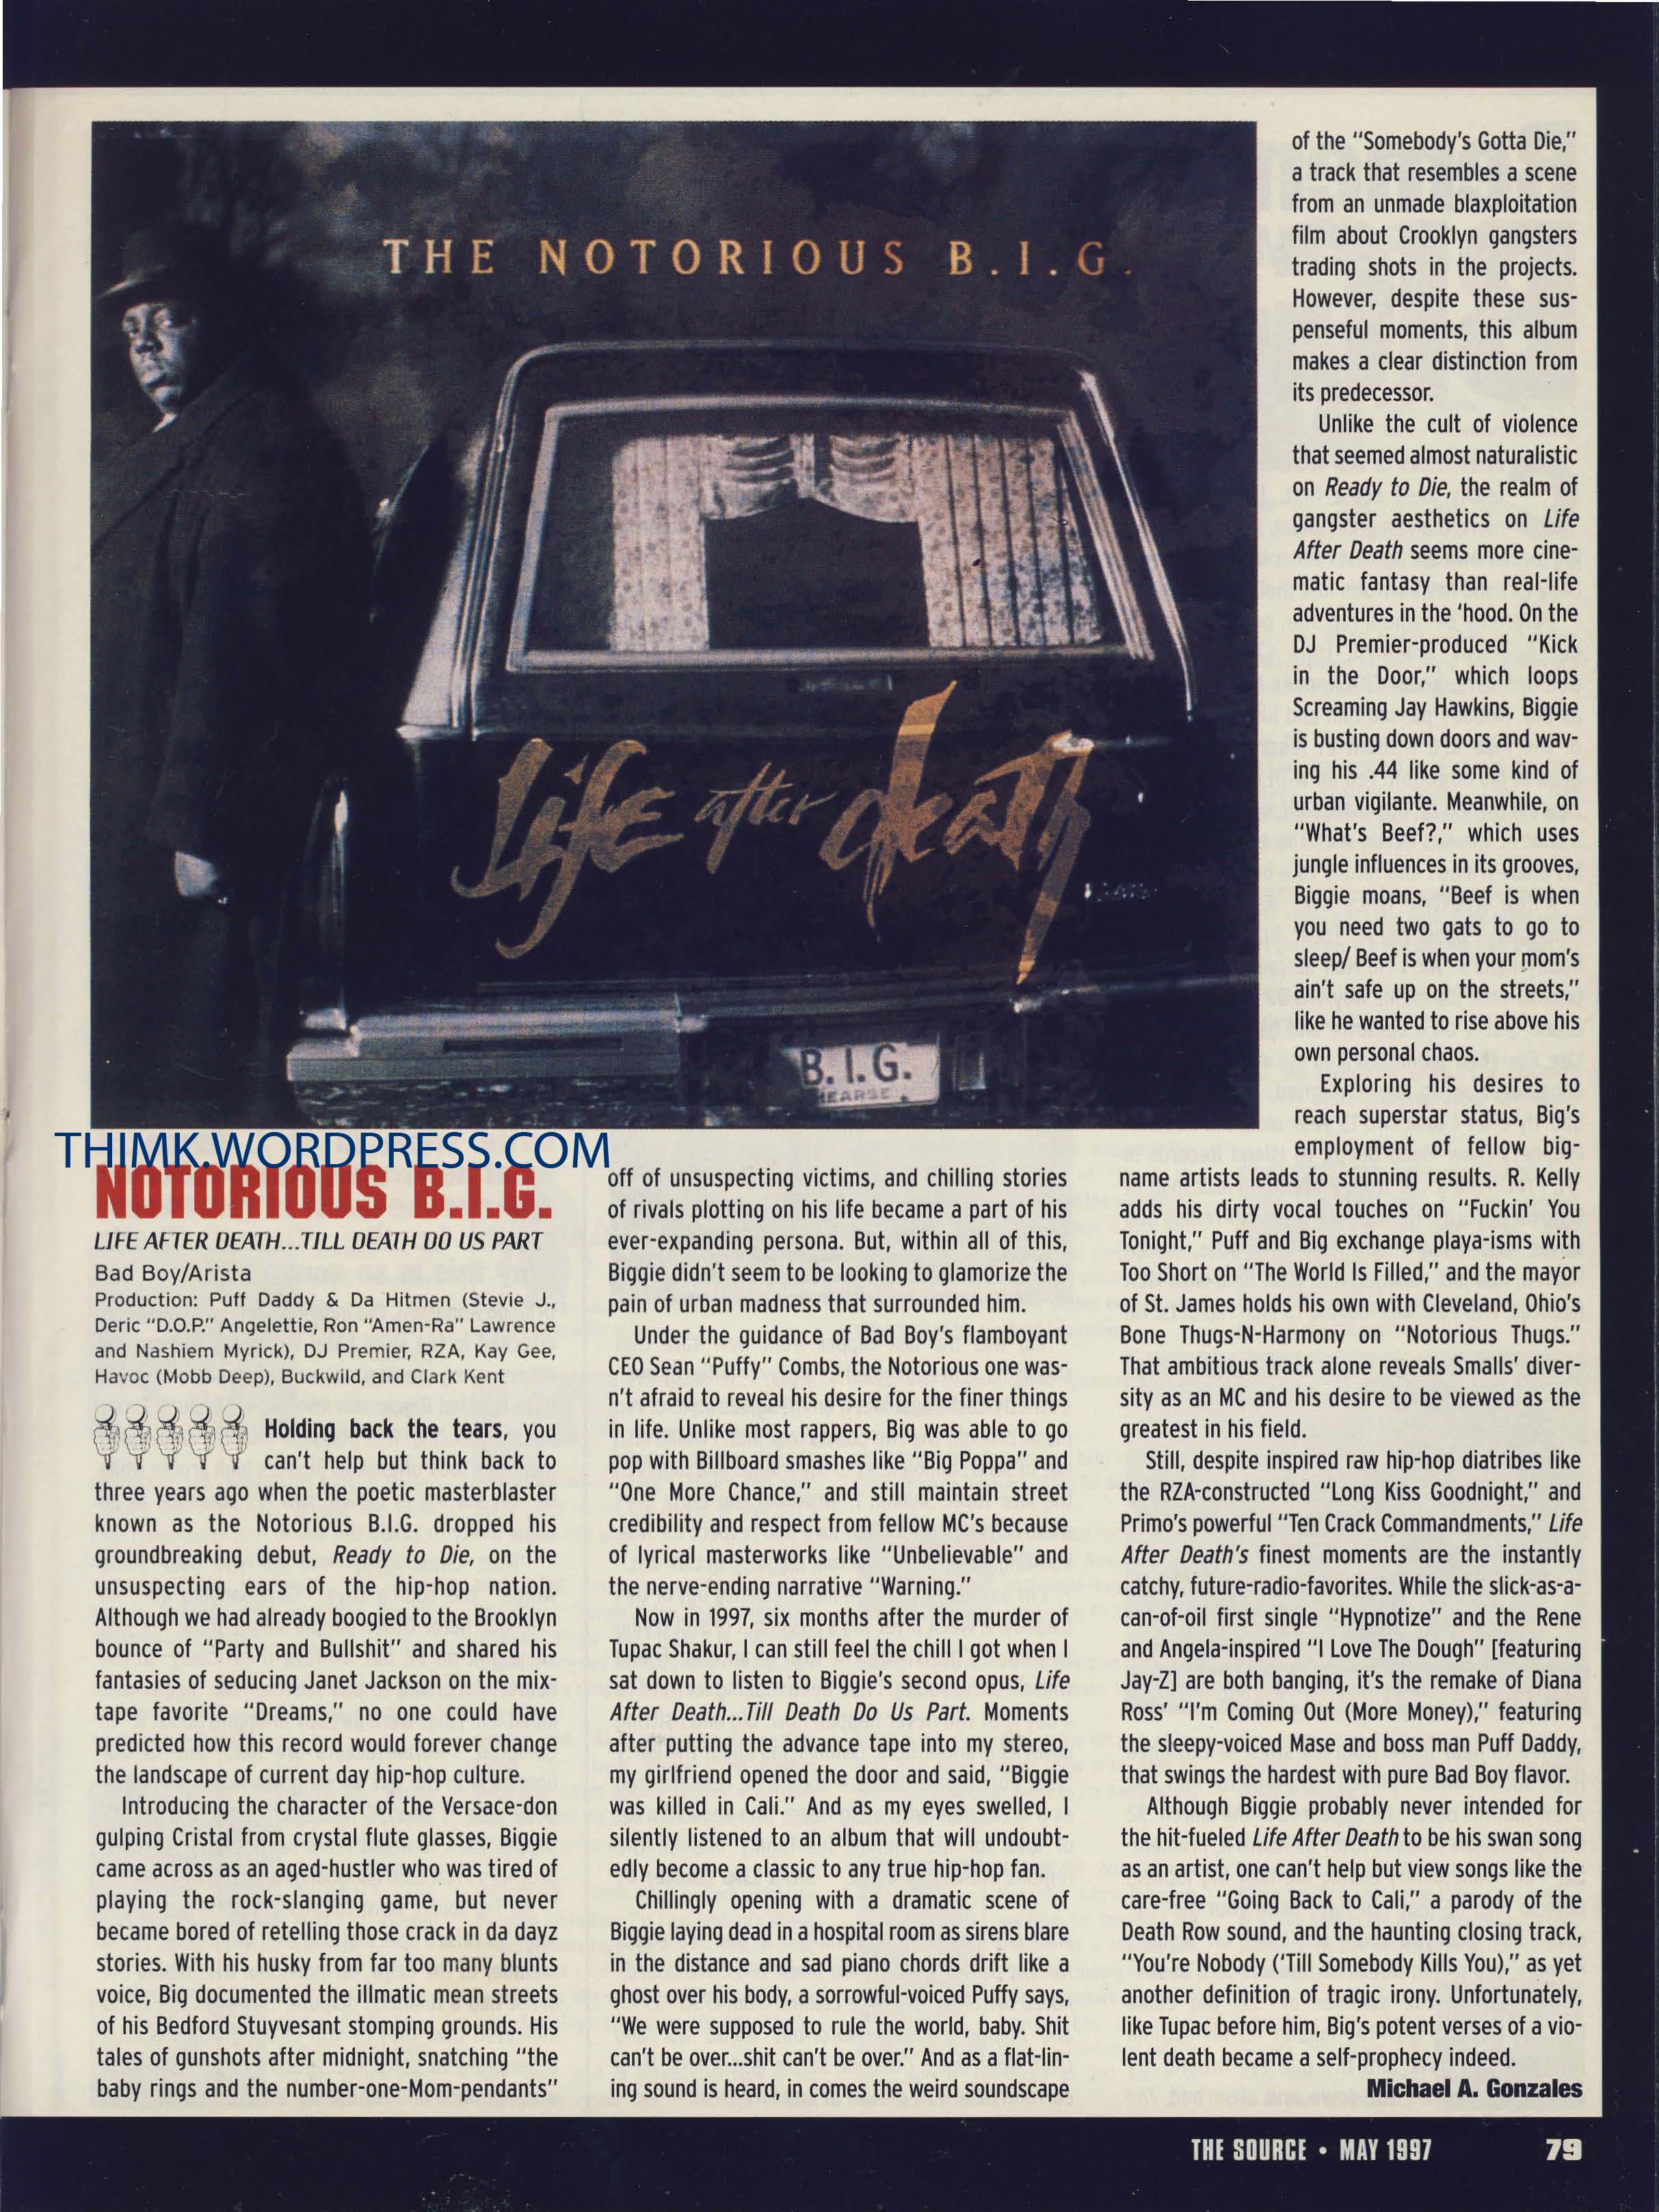 Life After Death - Magazine Web Edition September 1999